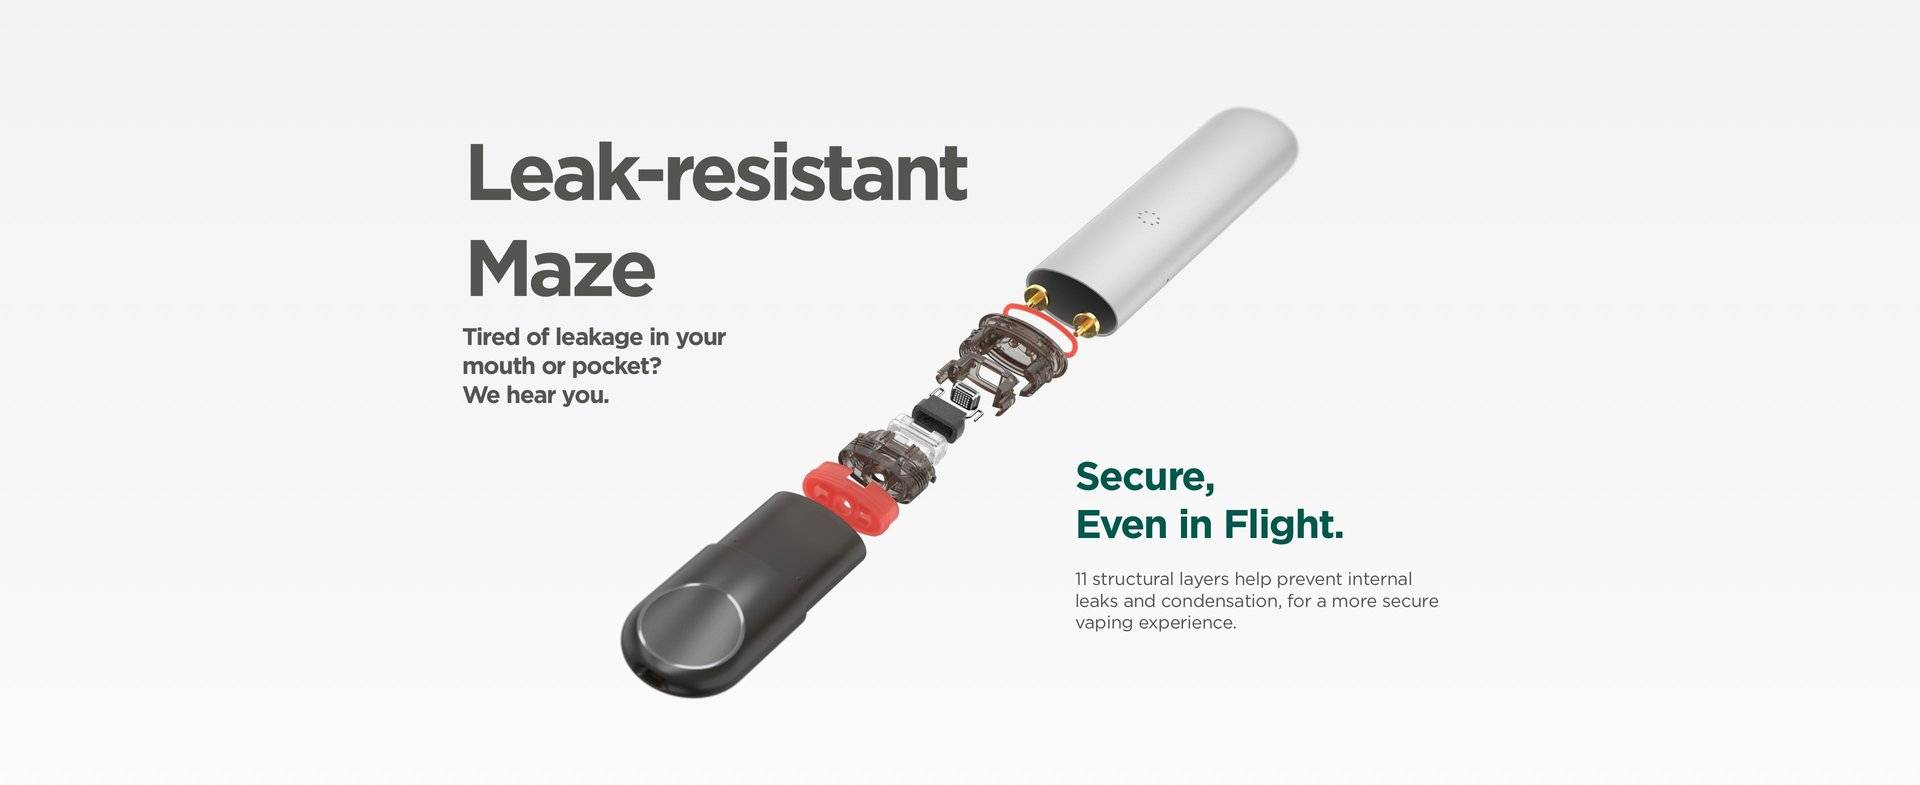 RELX Device is secure even in flight.